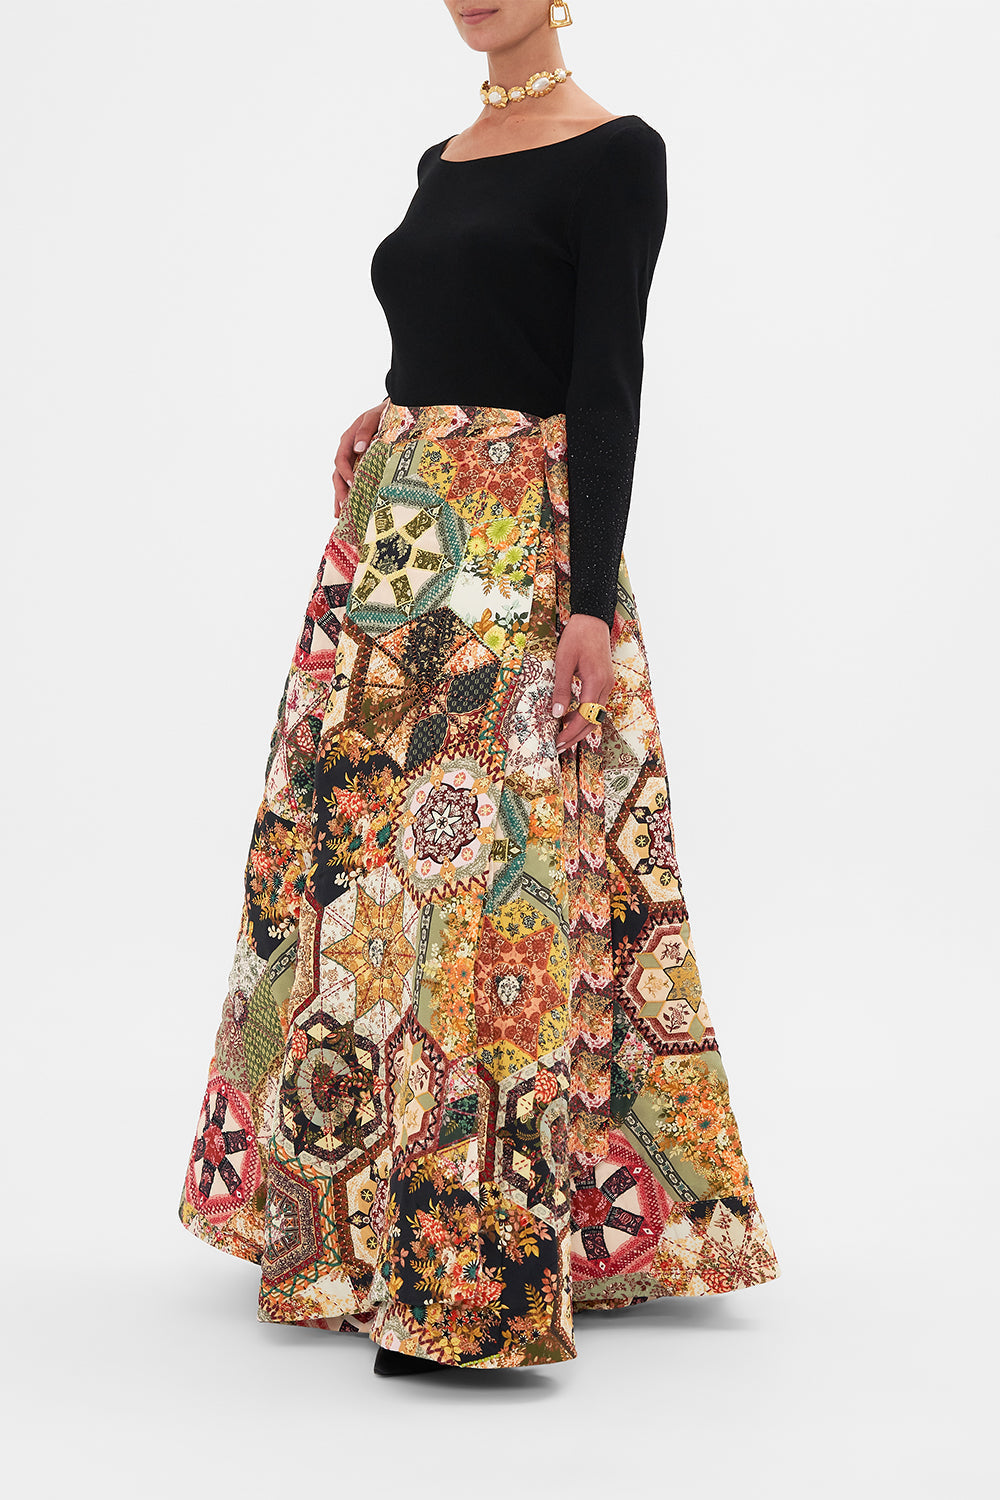 CAMILLA Black Reversible Embroidered Quilted Wrap Skirt in Stitched in Time print